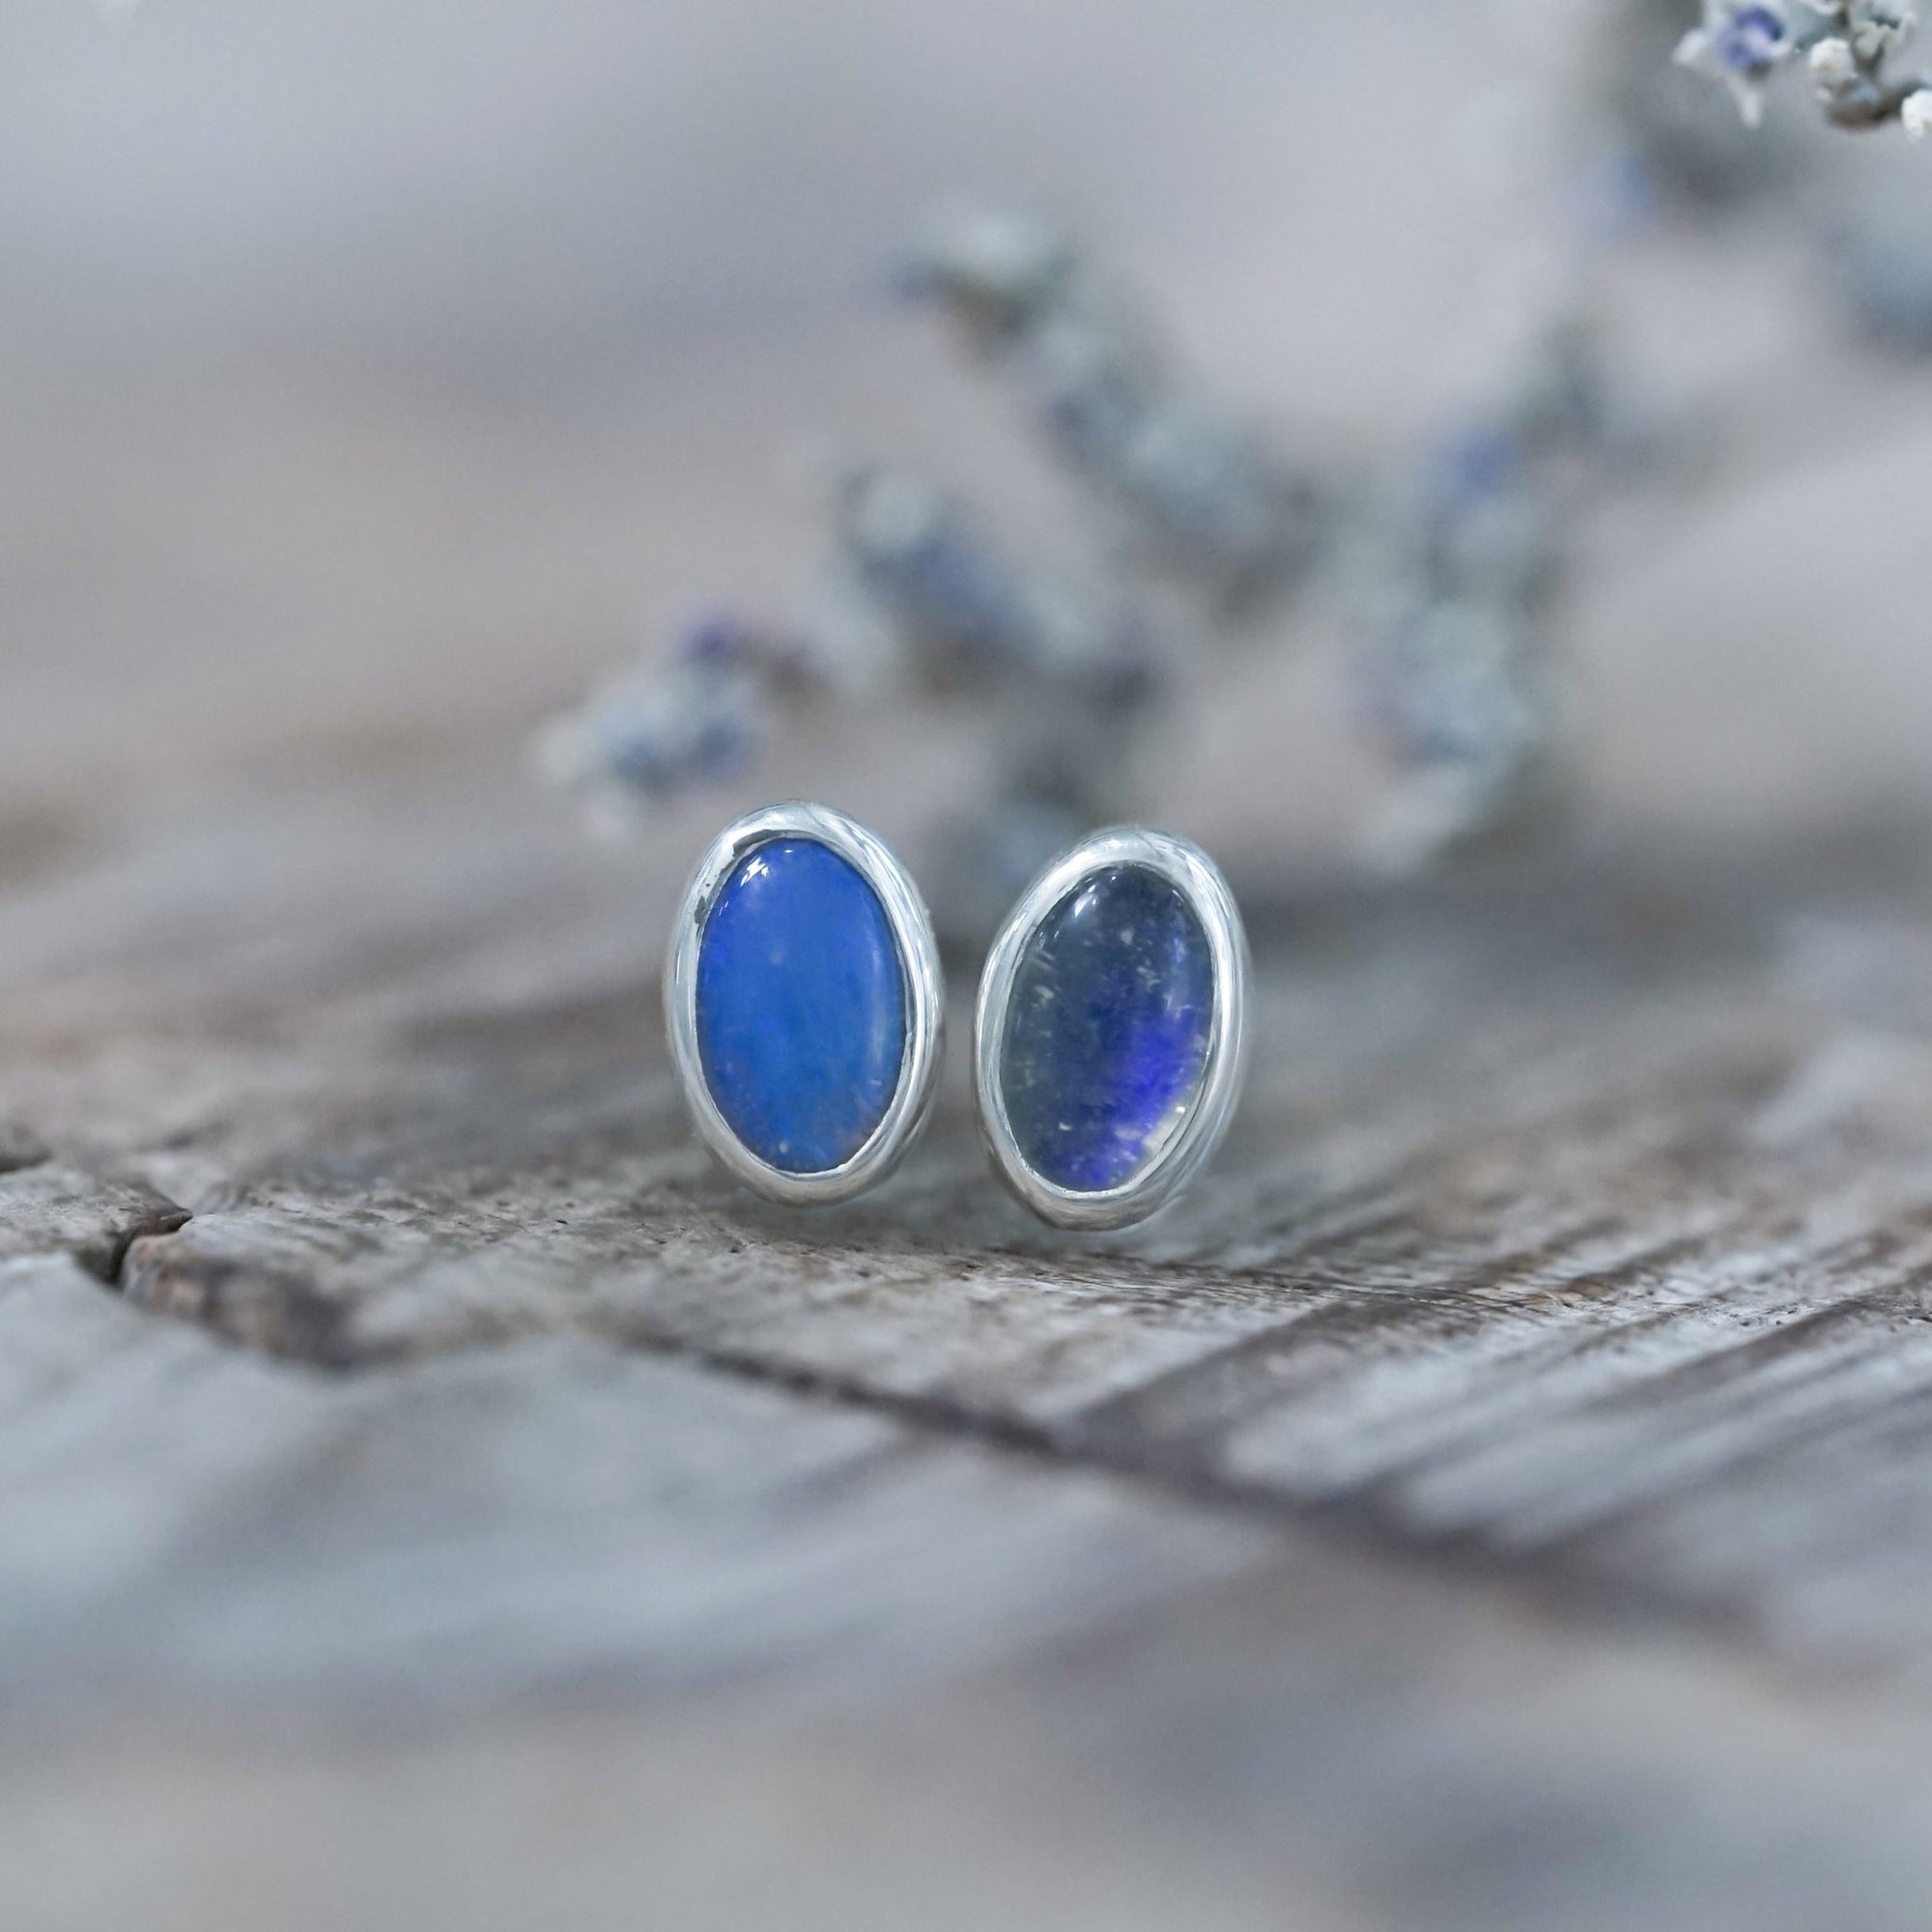 Oval Opal Earrings - Gardens of the Sun | Ethical Jewelry